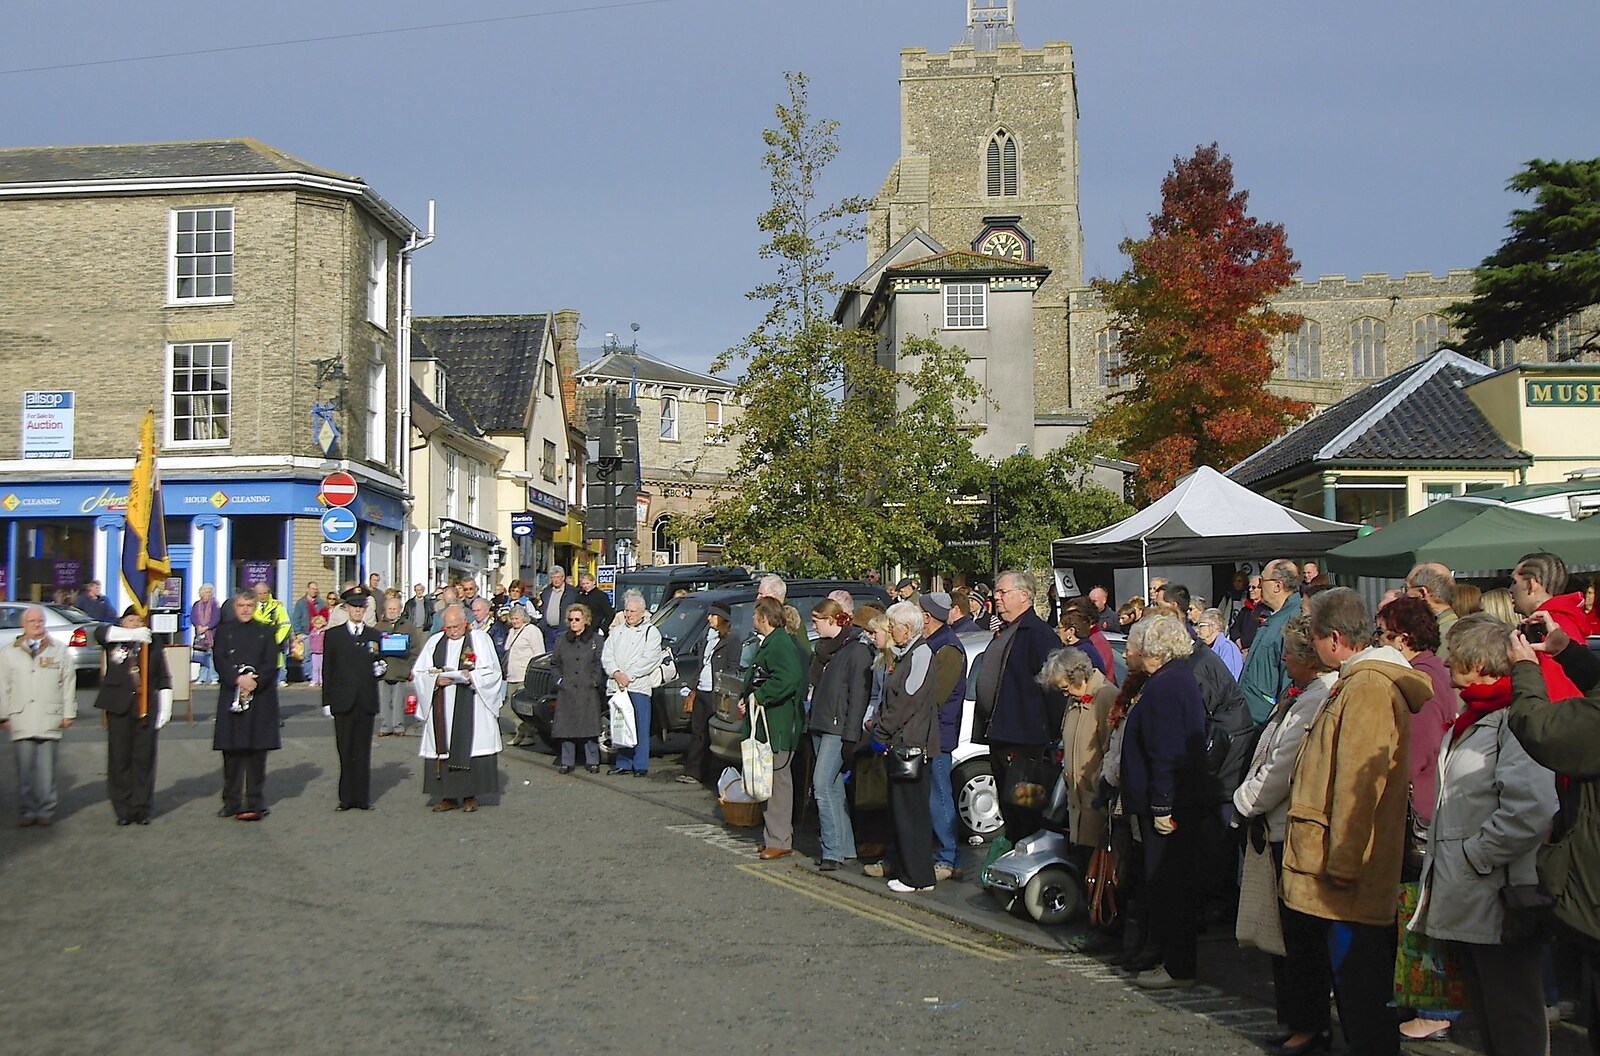 Another view of the crowds in the Market Place from Apples, Isobel's Birthday and  Remembrance Day, Cambridge and Diss, Norfolk - 11th November 2006